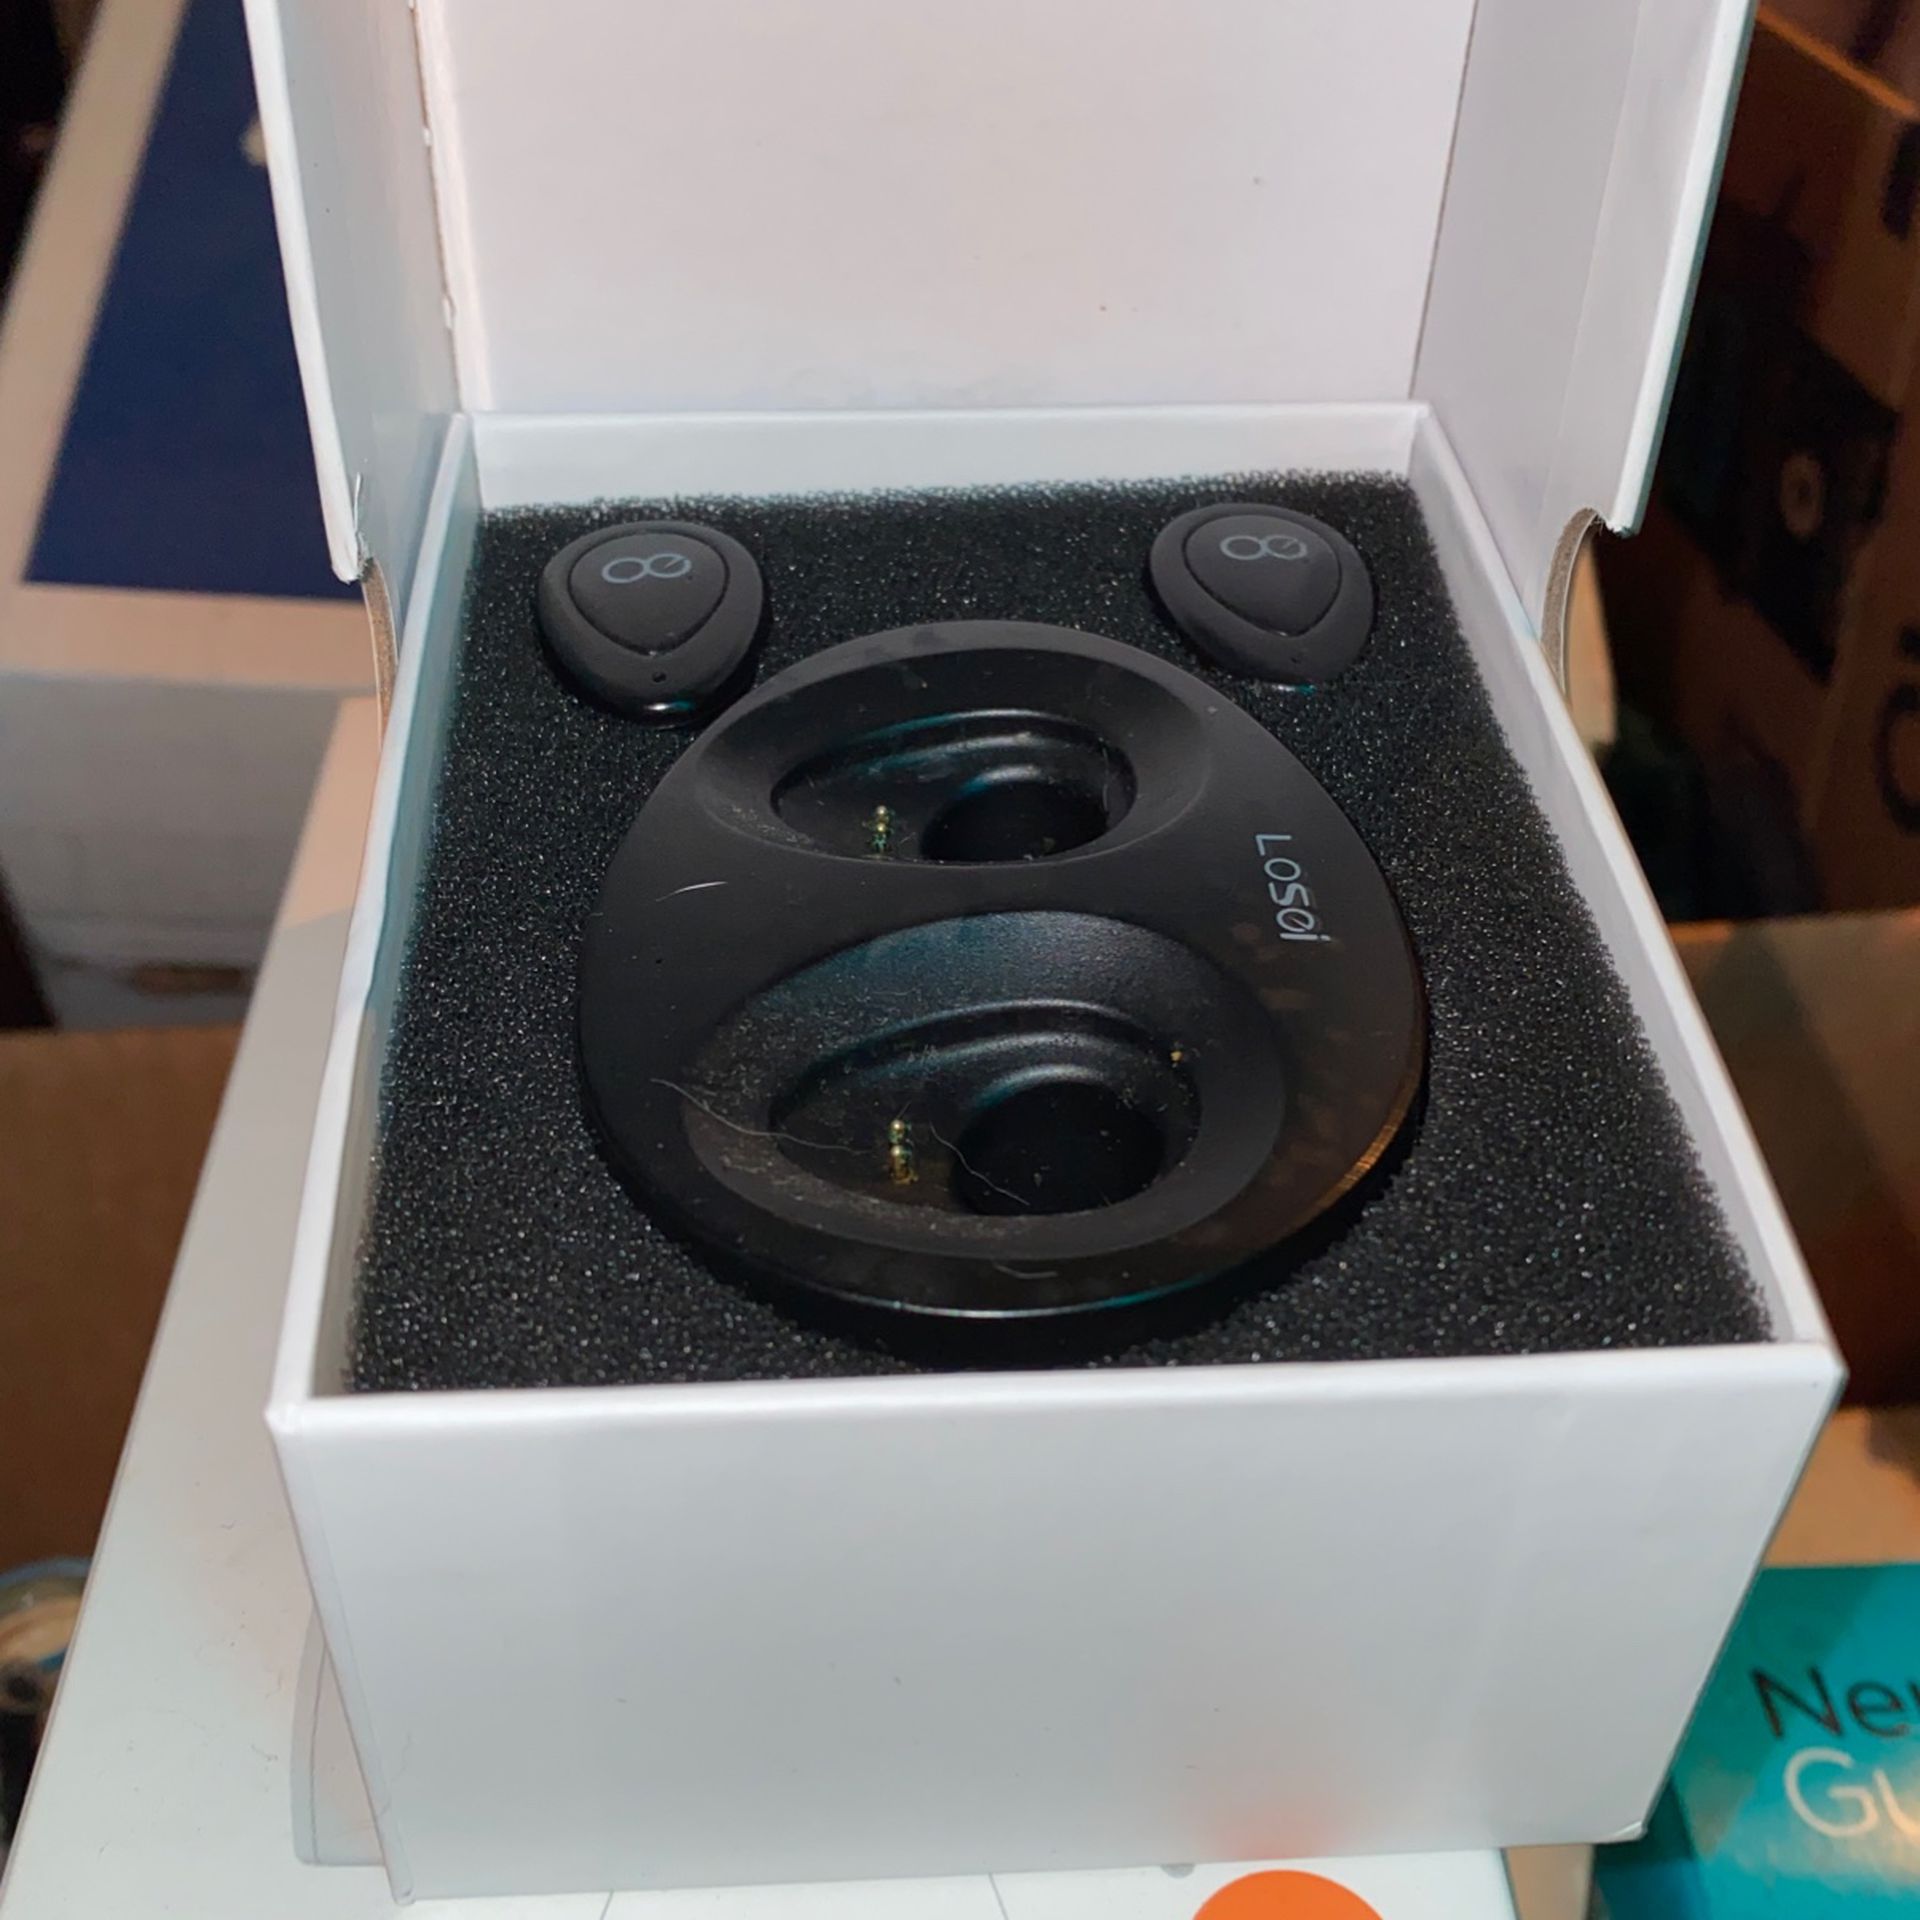 Bluetooth Earbuds with Battery Base for immediate sale!